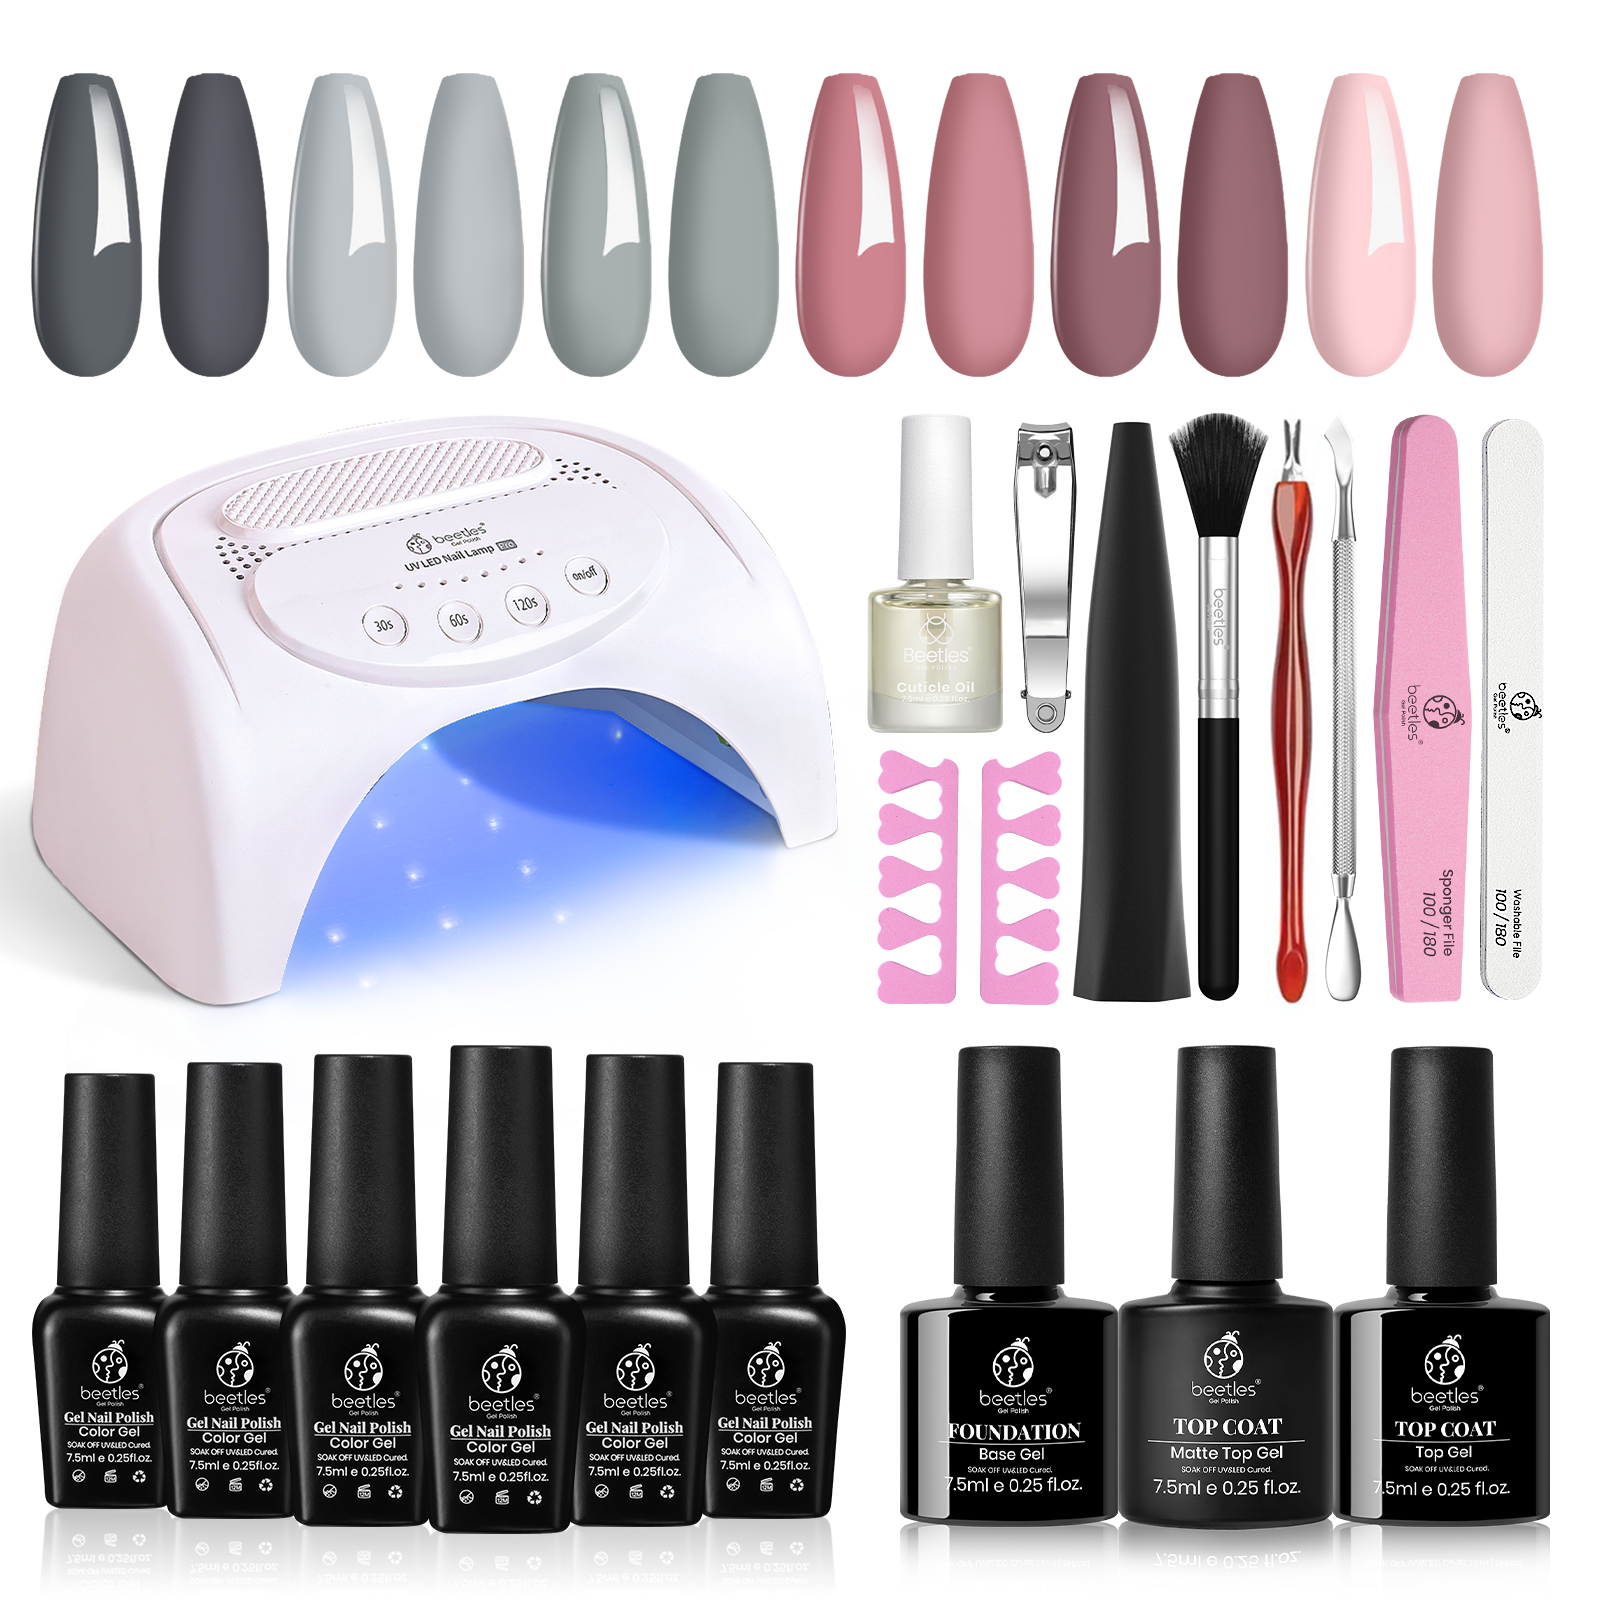 All-in-one Nail Starter Kit Gel Manicure Gift Box with 6 Shades#025